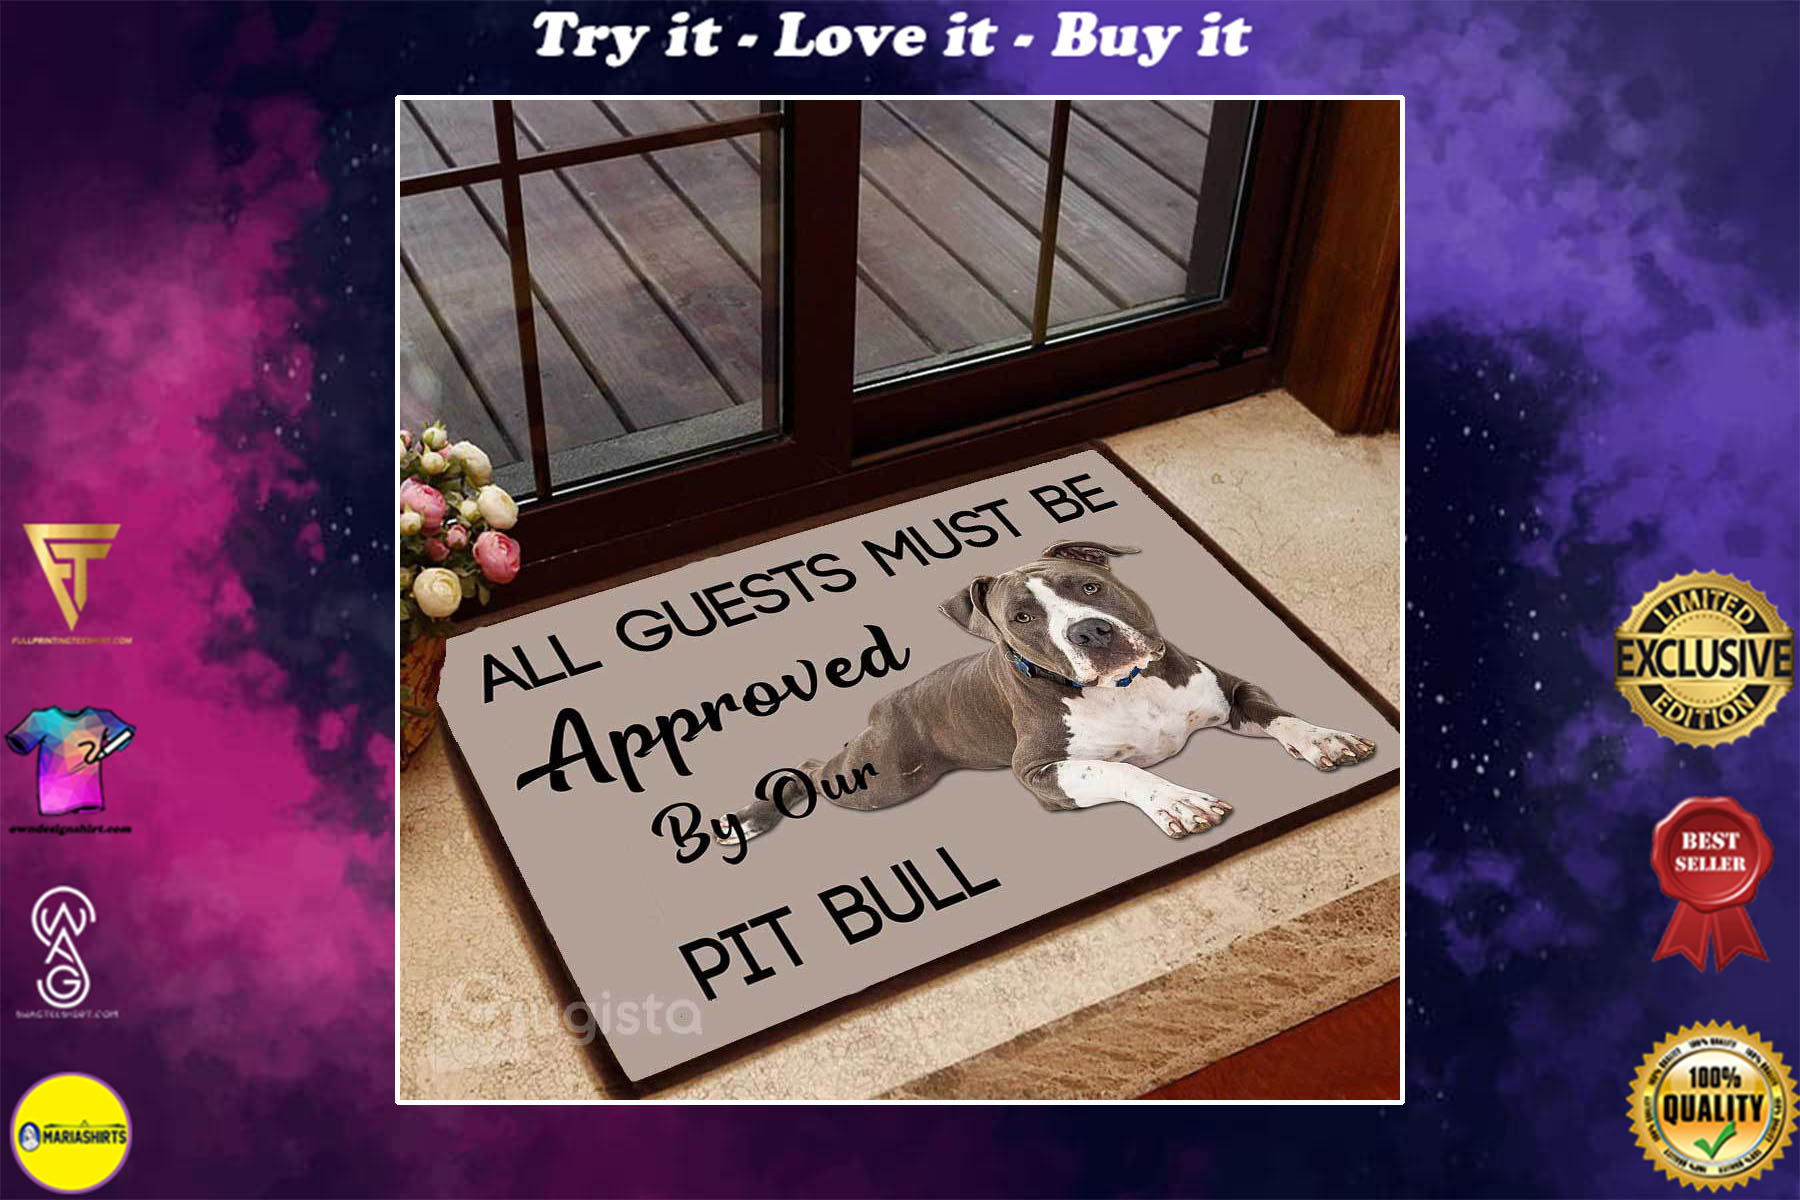 [special edition] all guests must be approved by our pit bull lying down doormat – maria